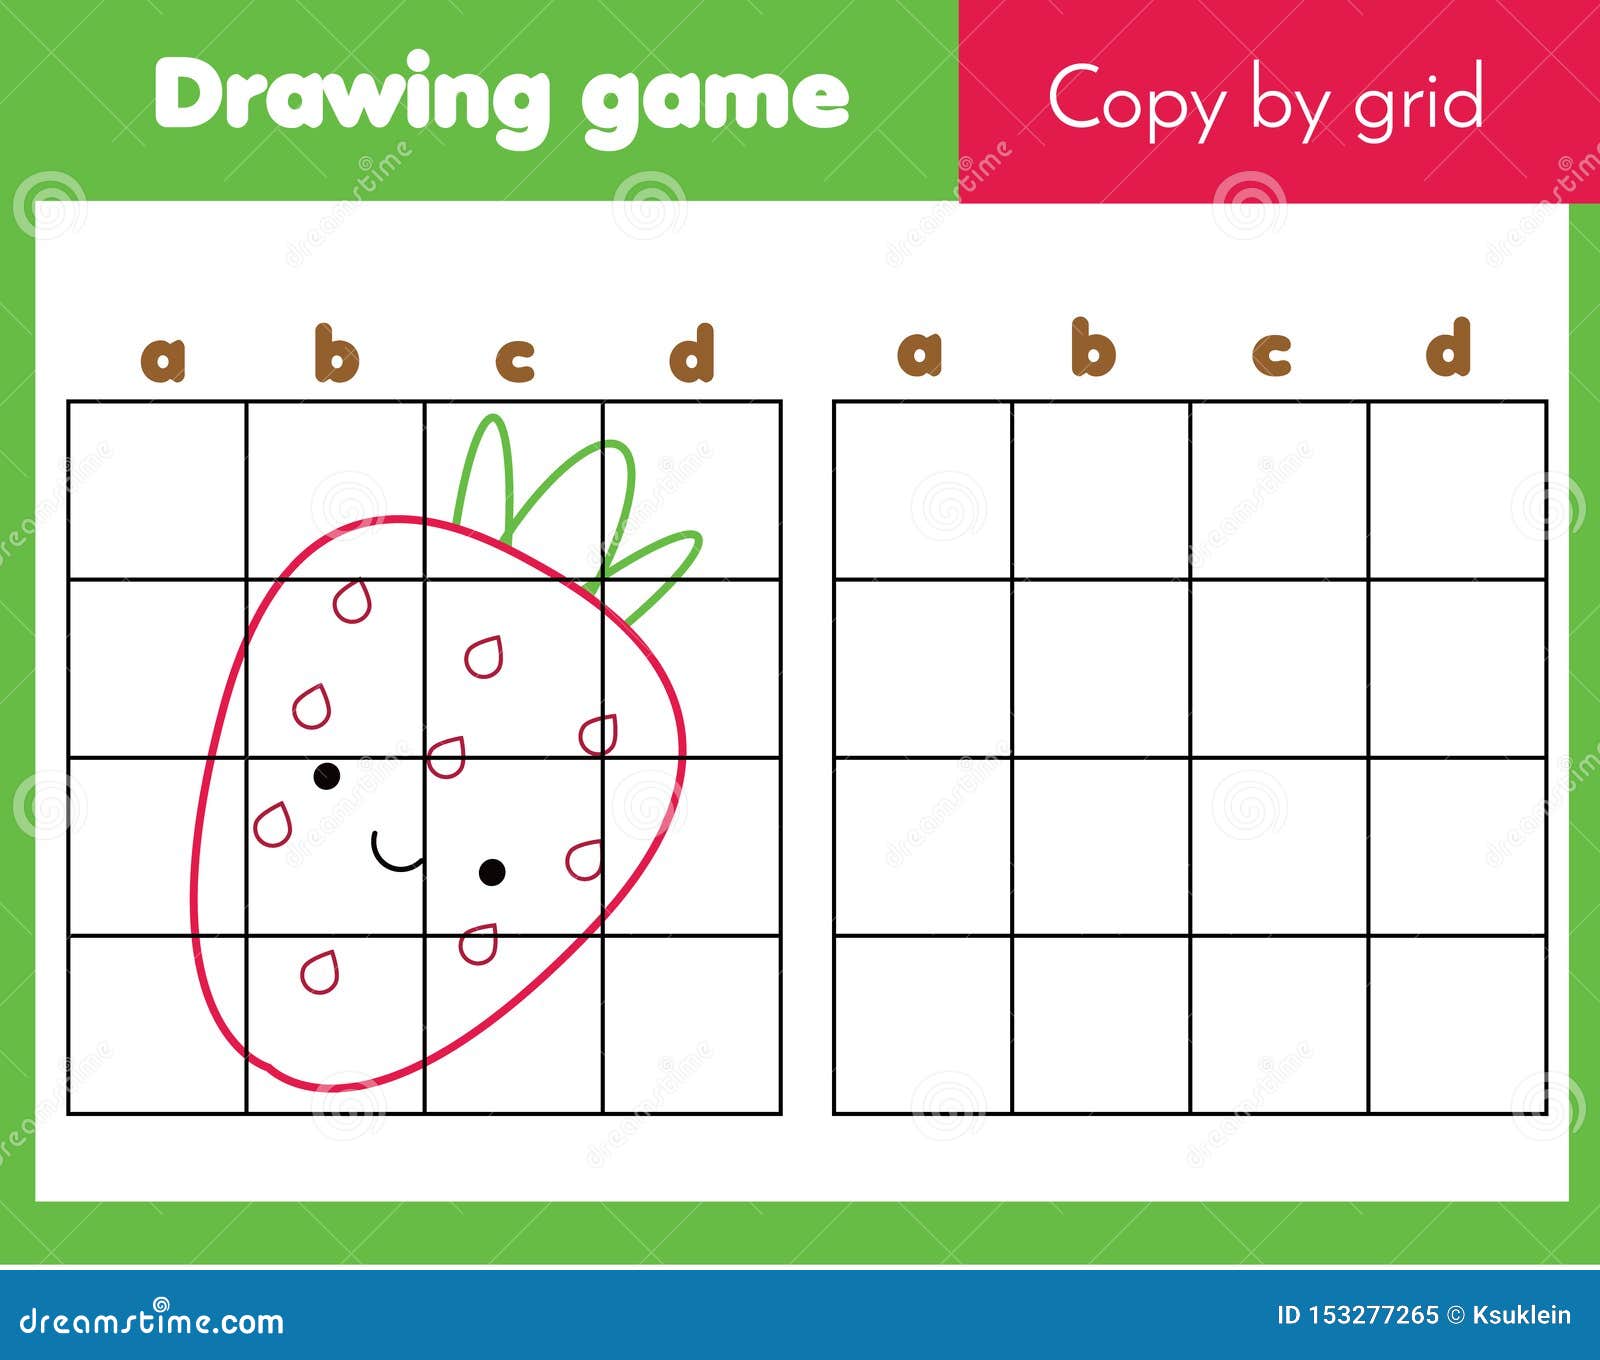 starwberry grid copy worksheet educational children game